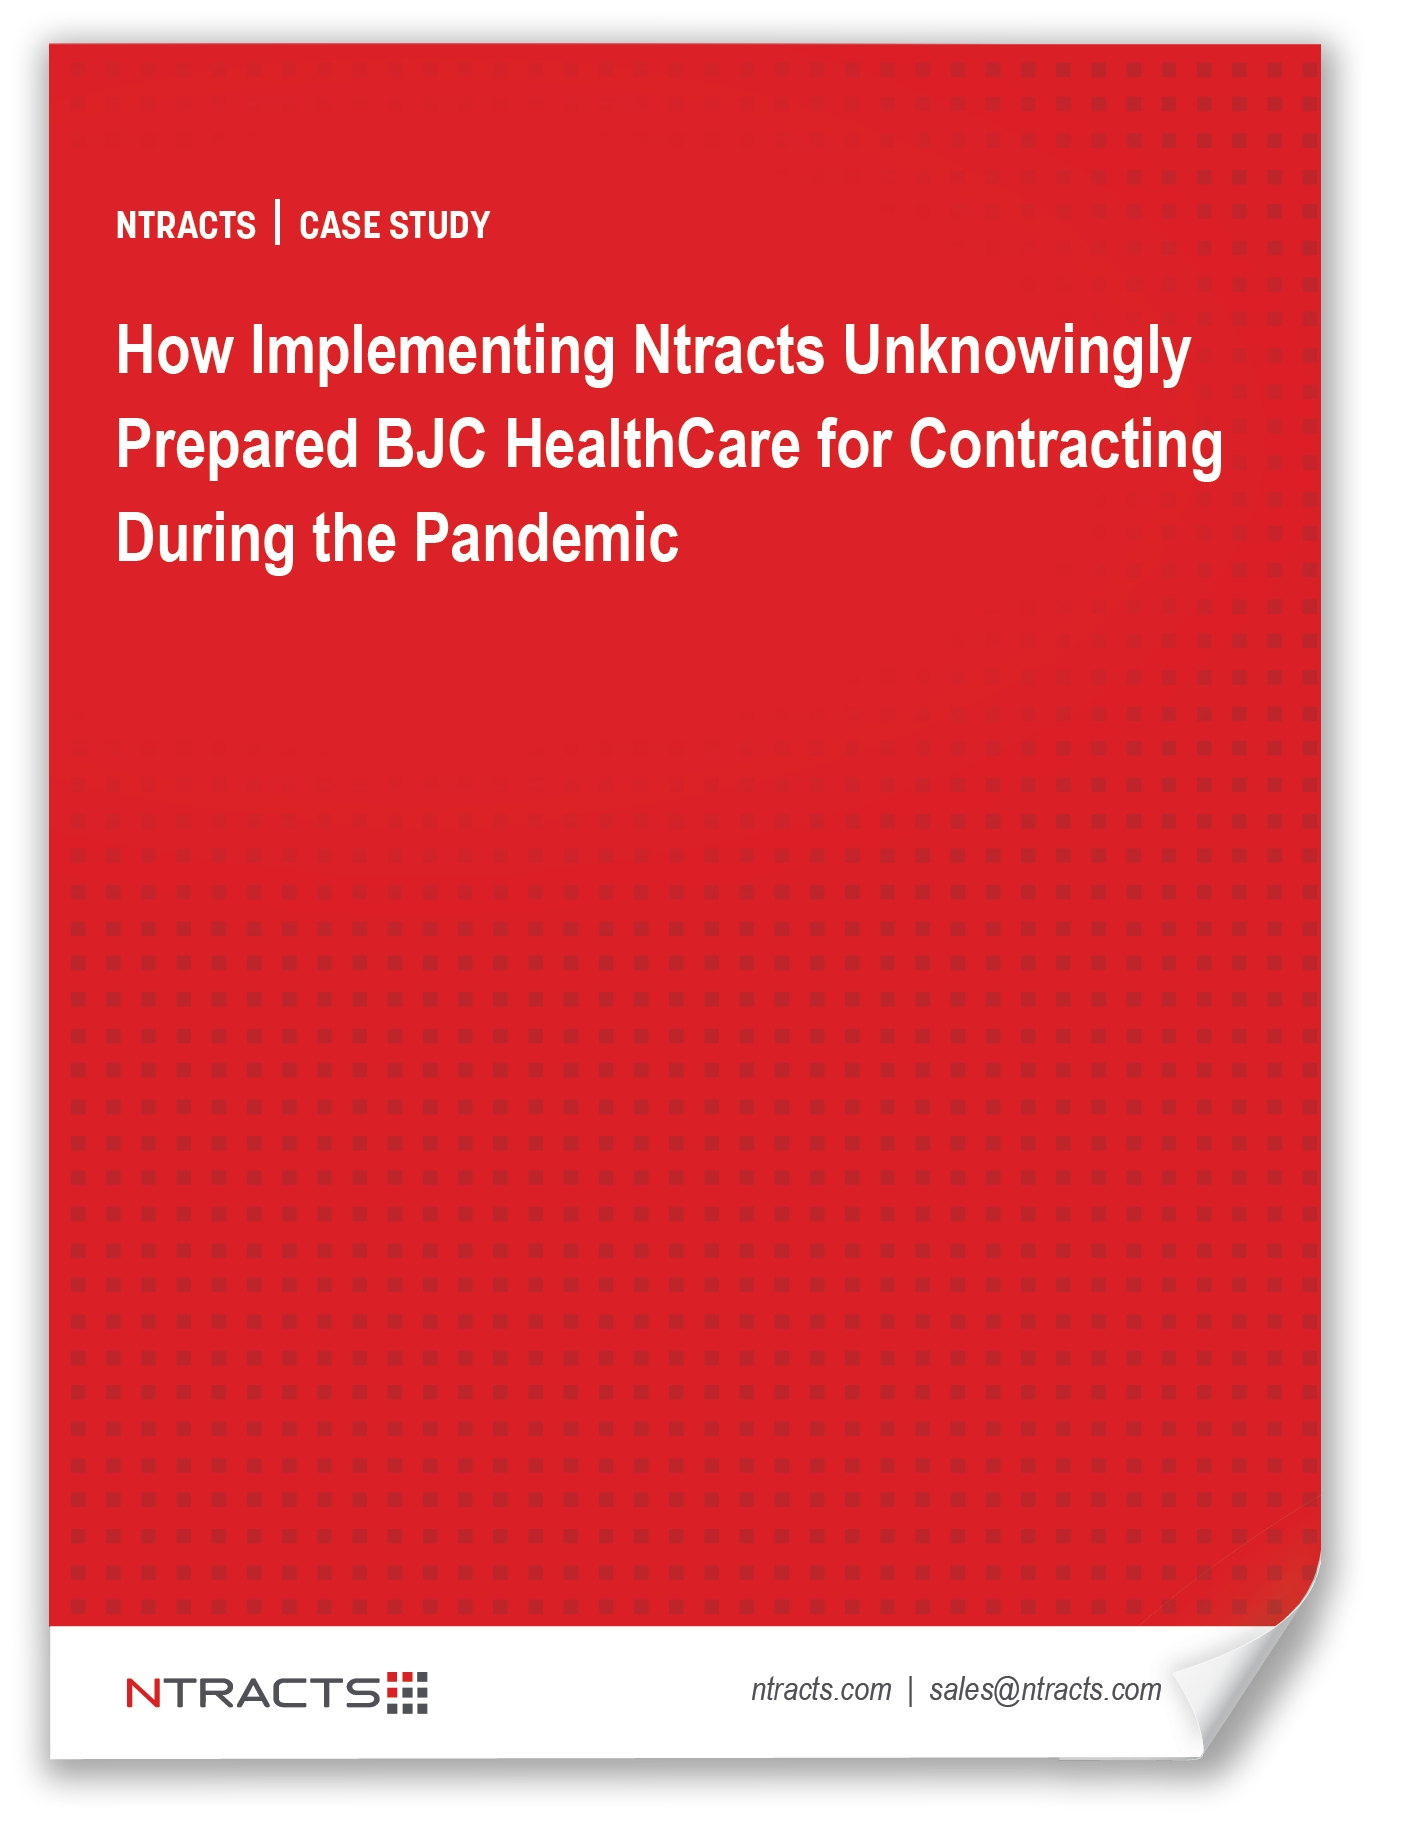 Case Study: How implementing Ntracts unknowingly prepared BJC HealthCare for contracting during the pandemic